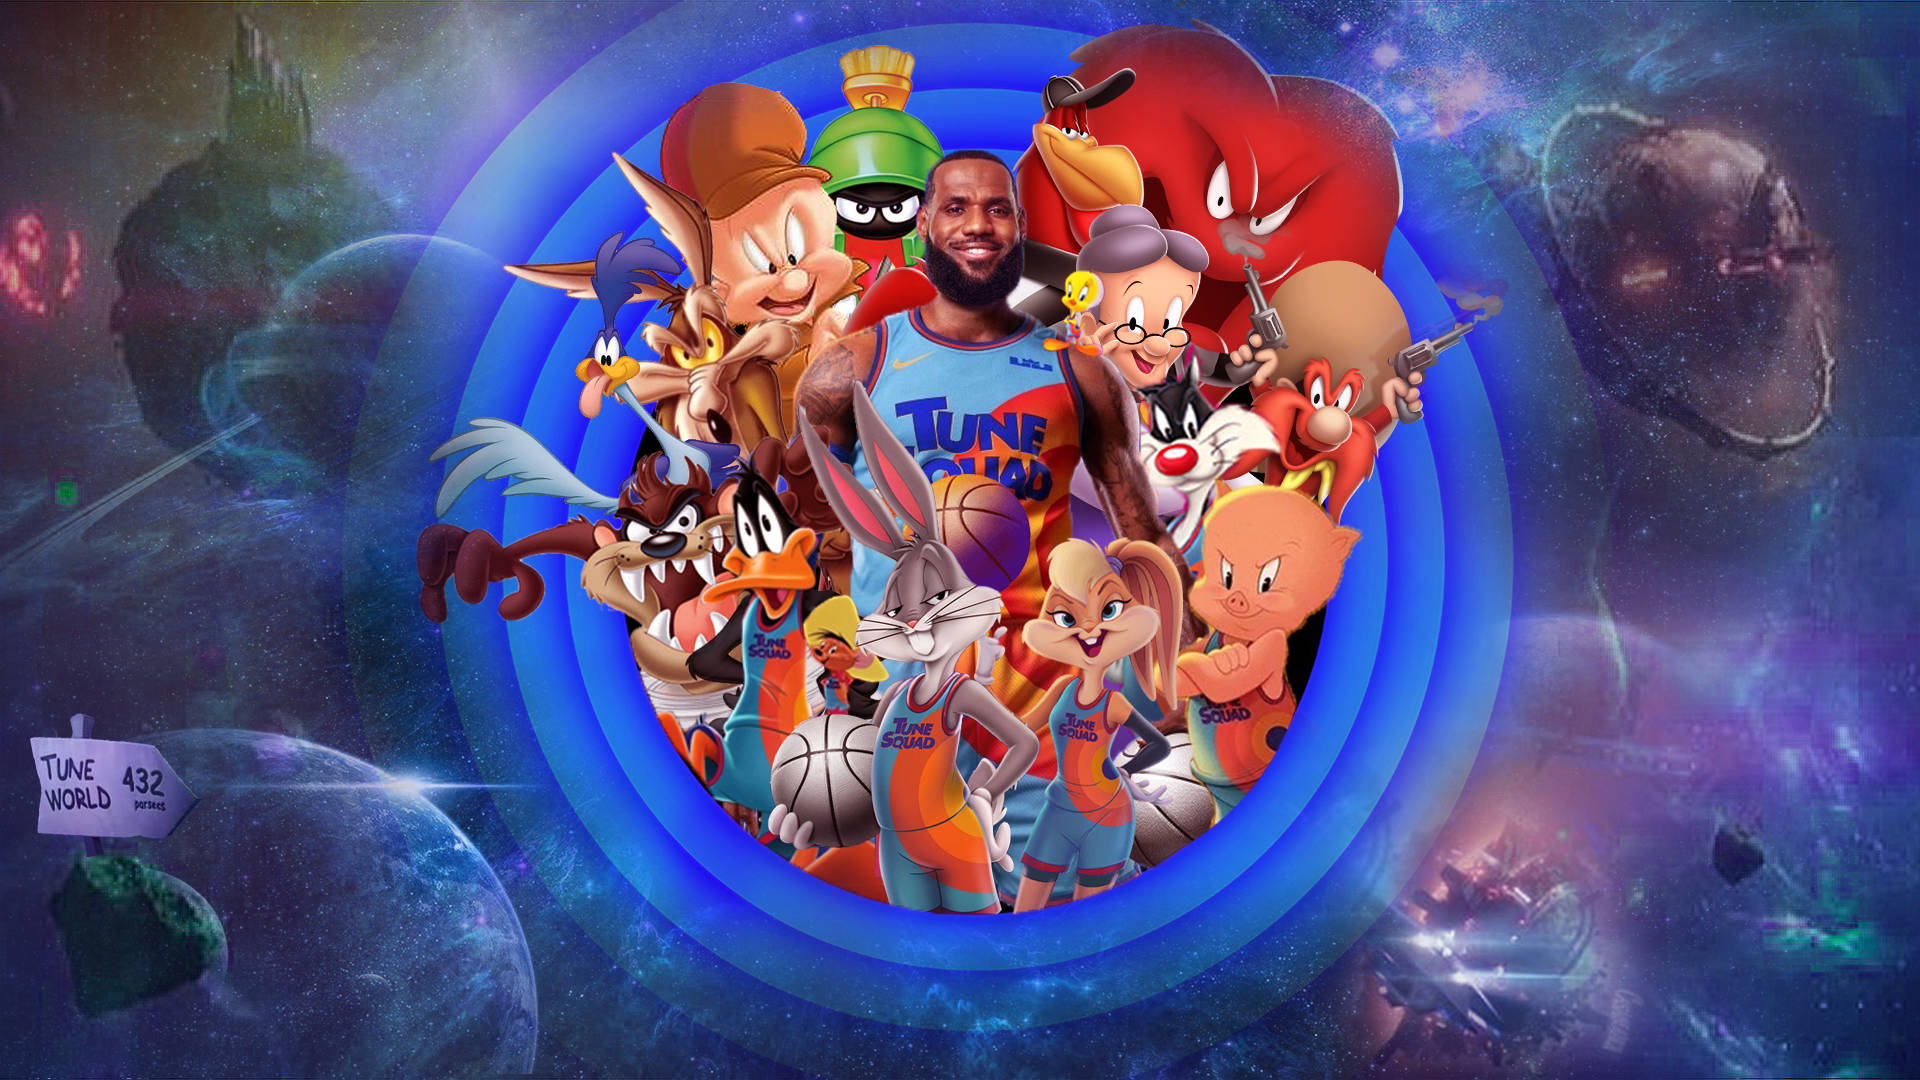 Get ready for interstellar basketball entertainment with the cast of Space Jam 2 Wallpaper